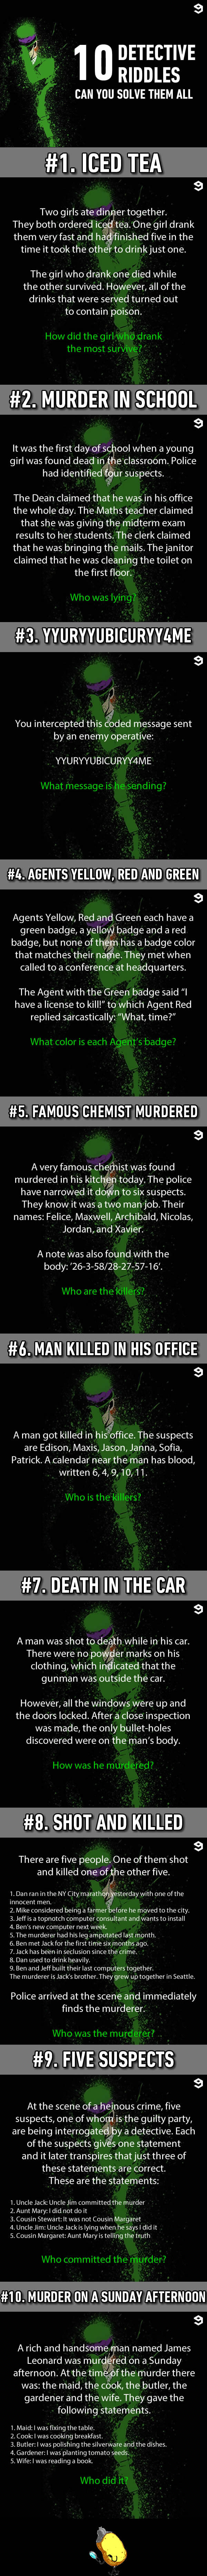 10-Murder-Riddles-That-Would-Bring-Out-The-Sherlock-In-You[1].jpg